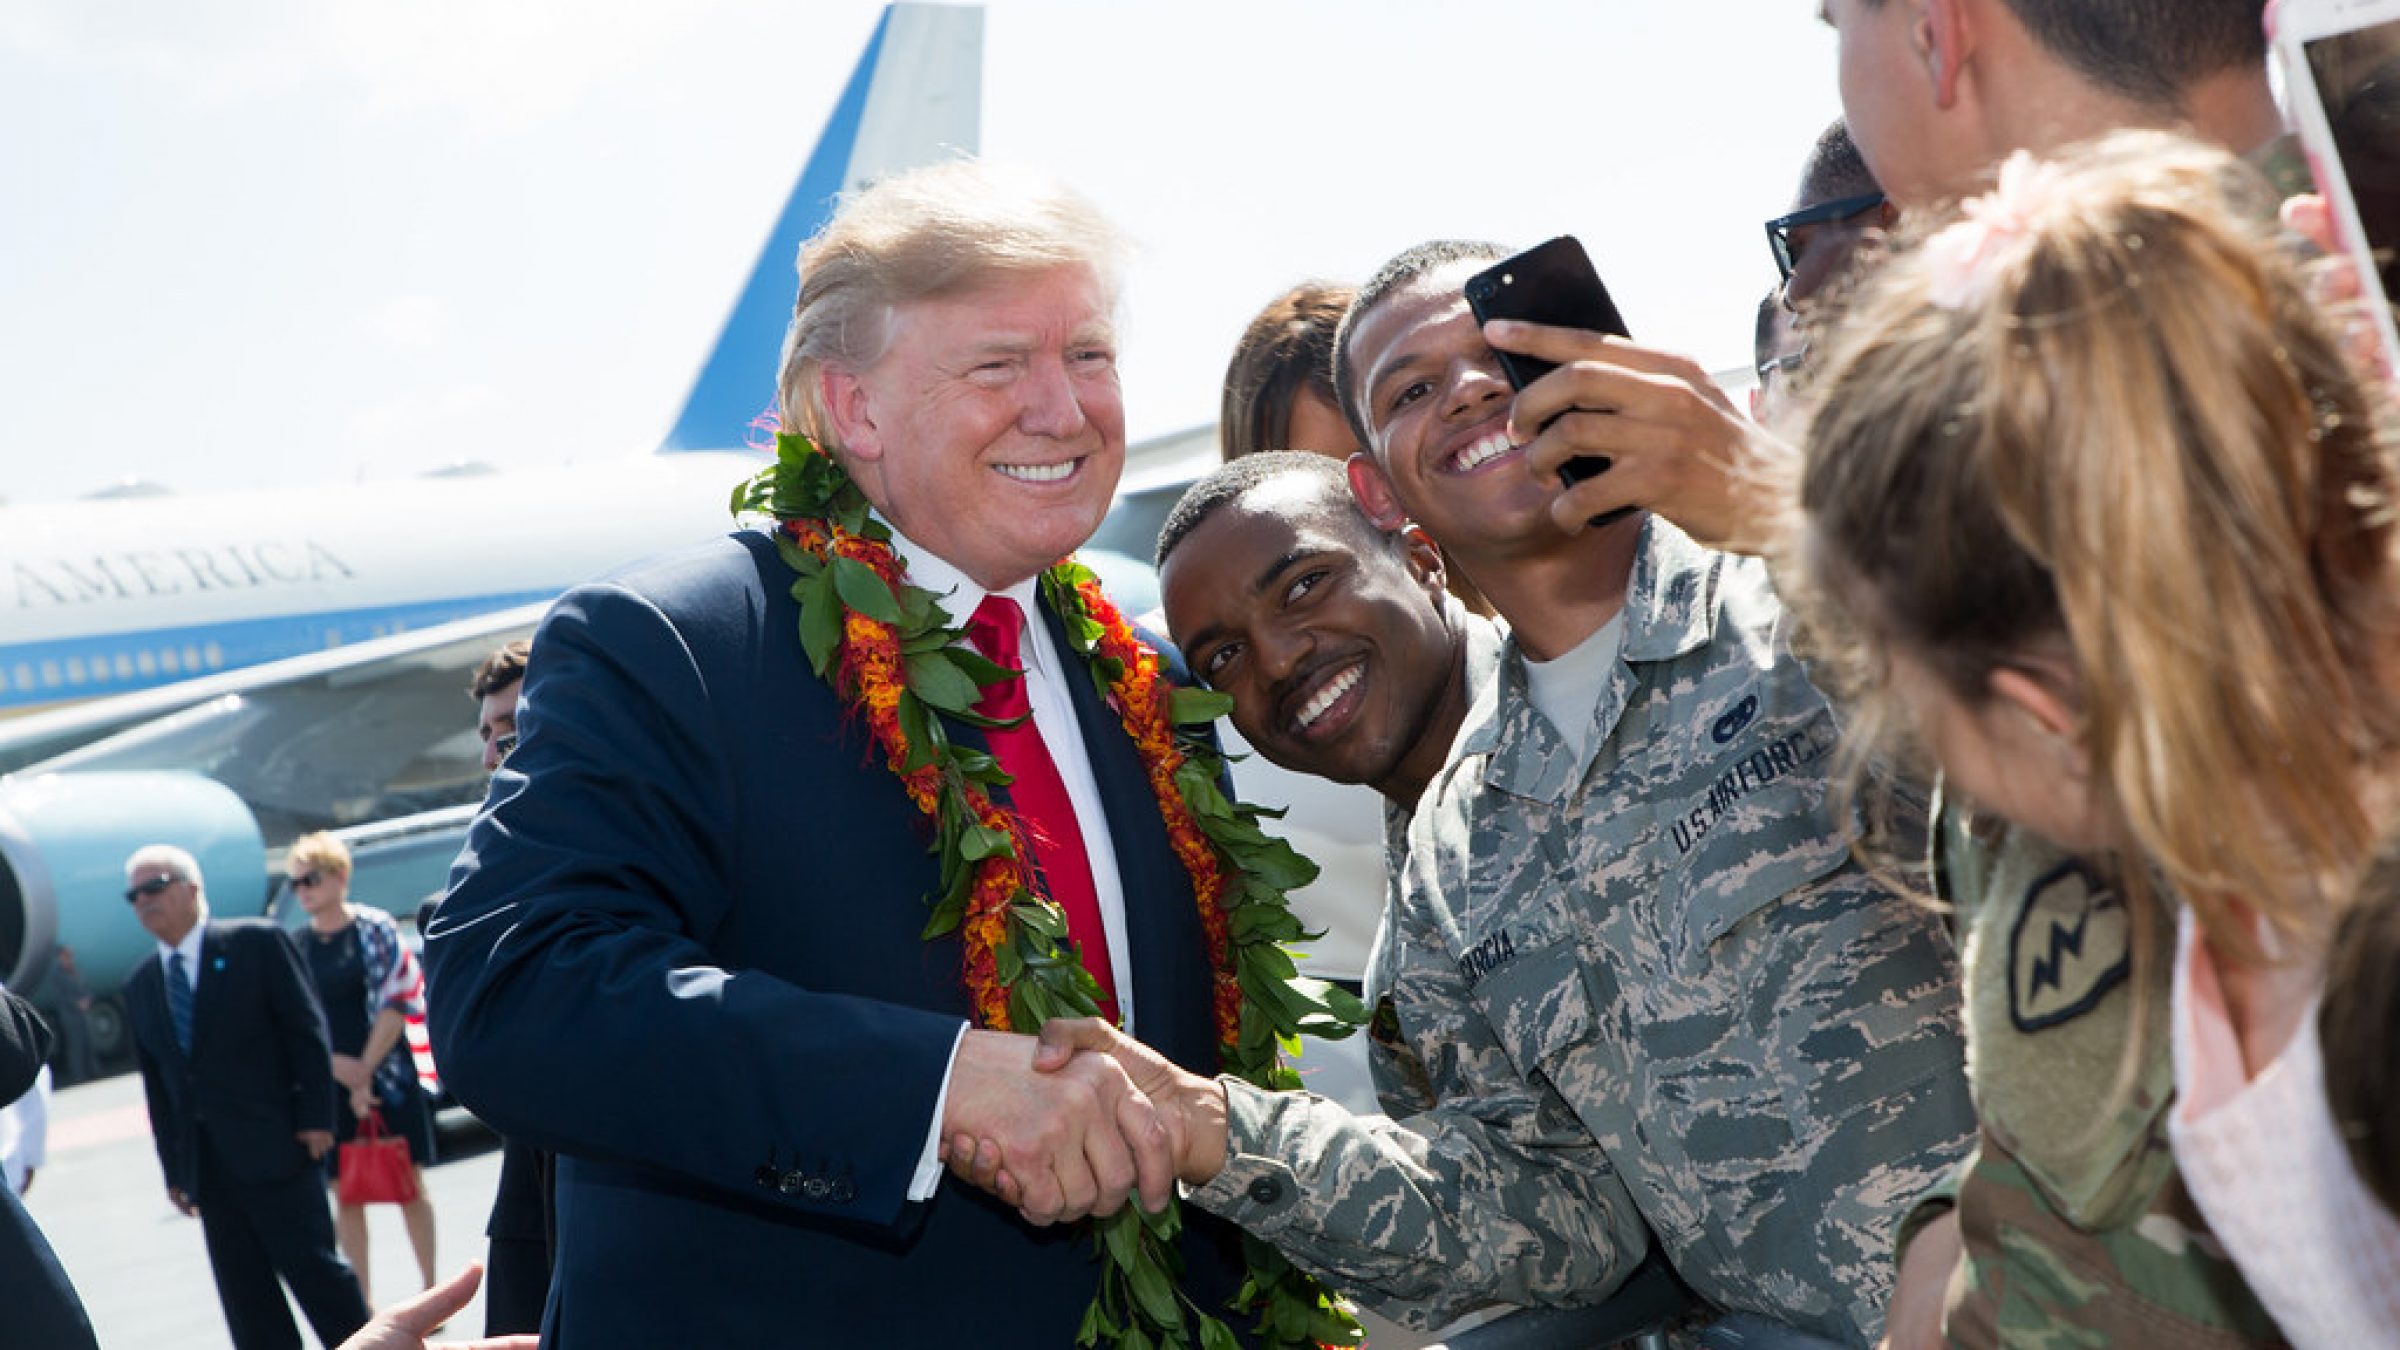 Donald Trump, wearing a lei, shakes hands and smiles for a selfie with a member of the US Air Force